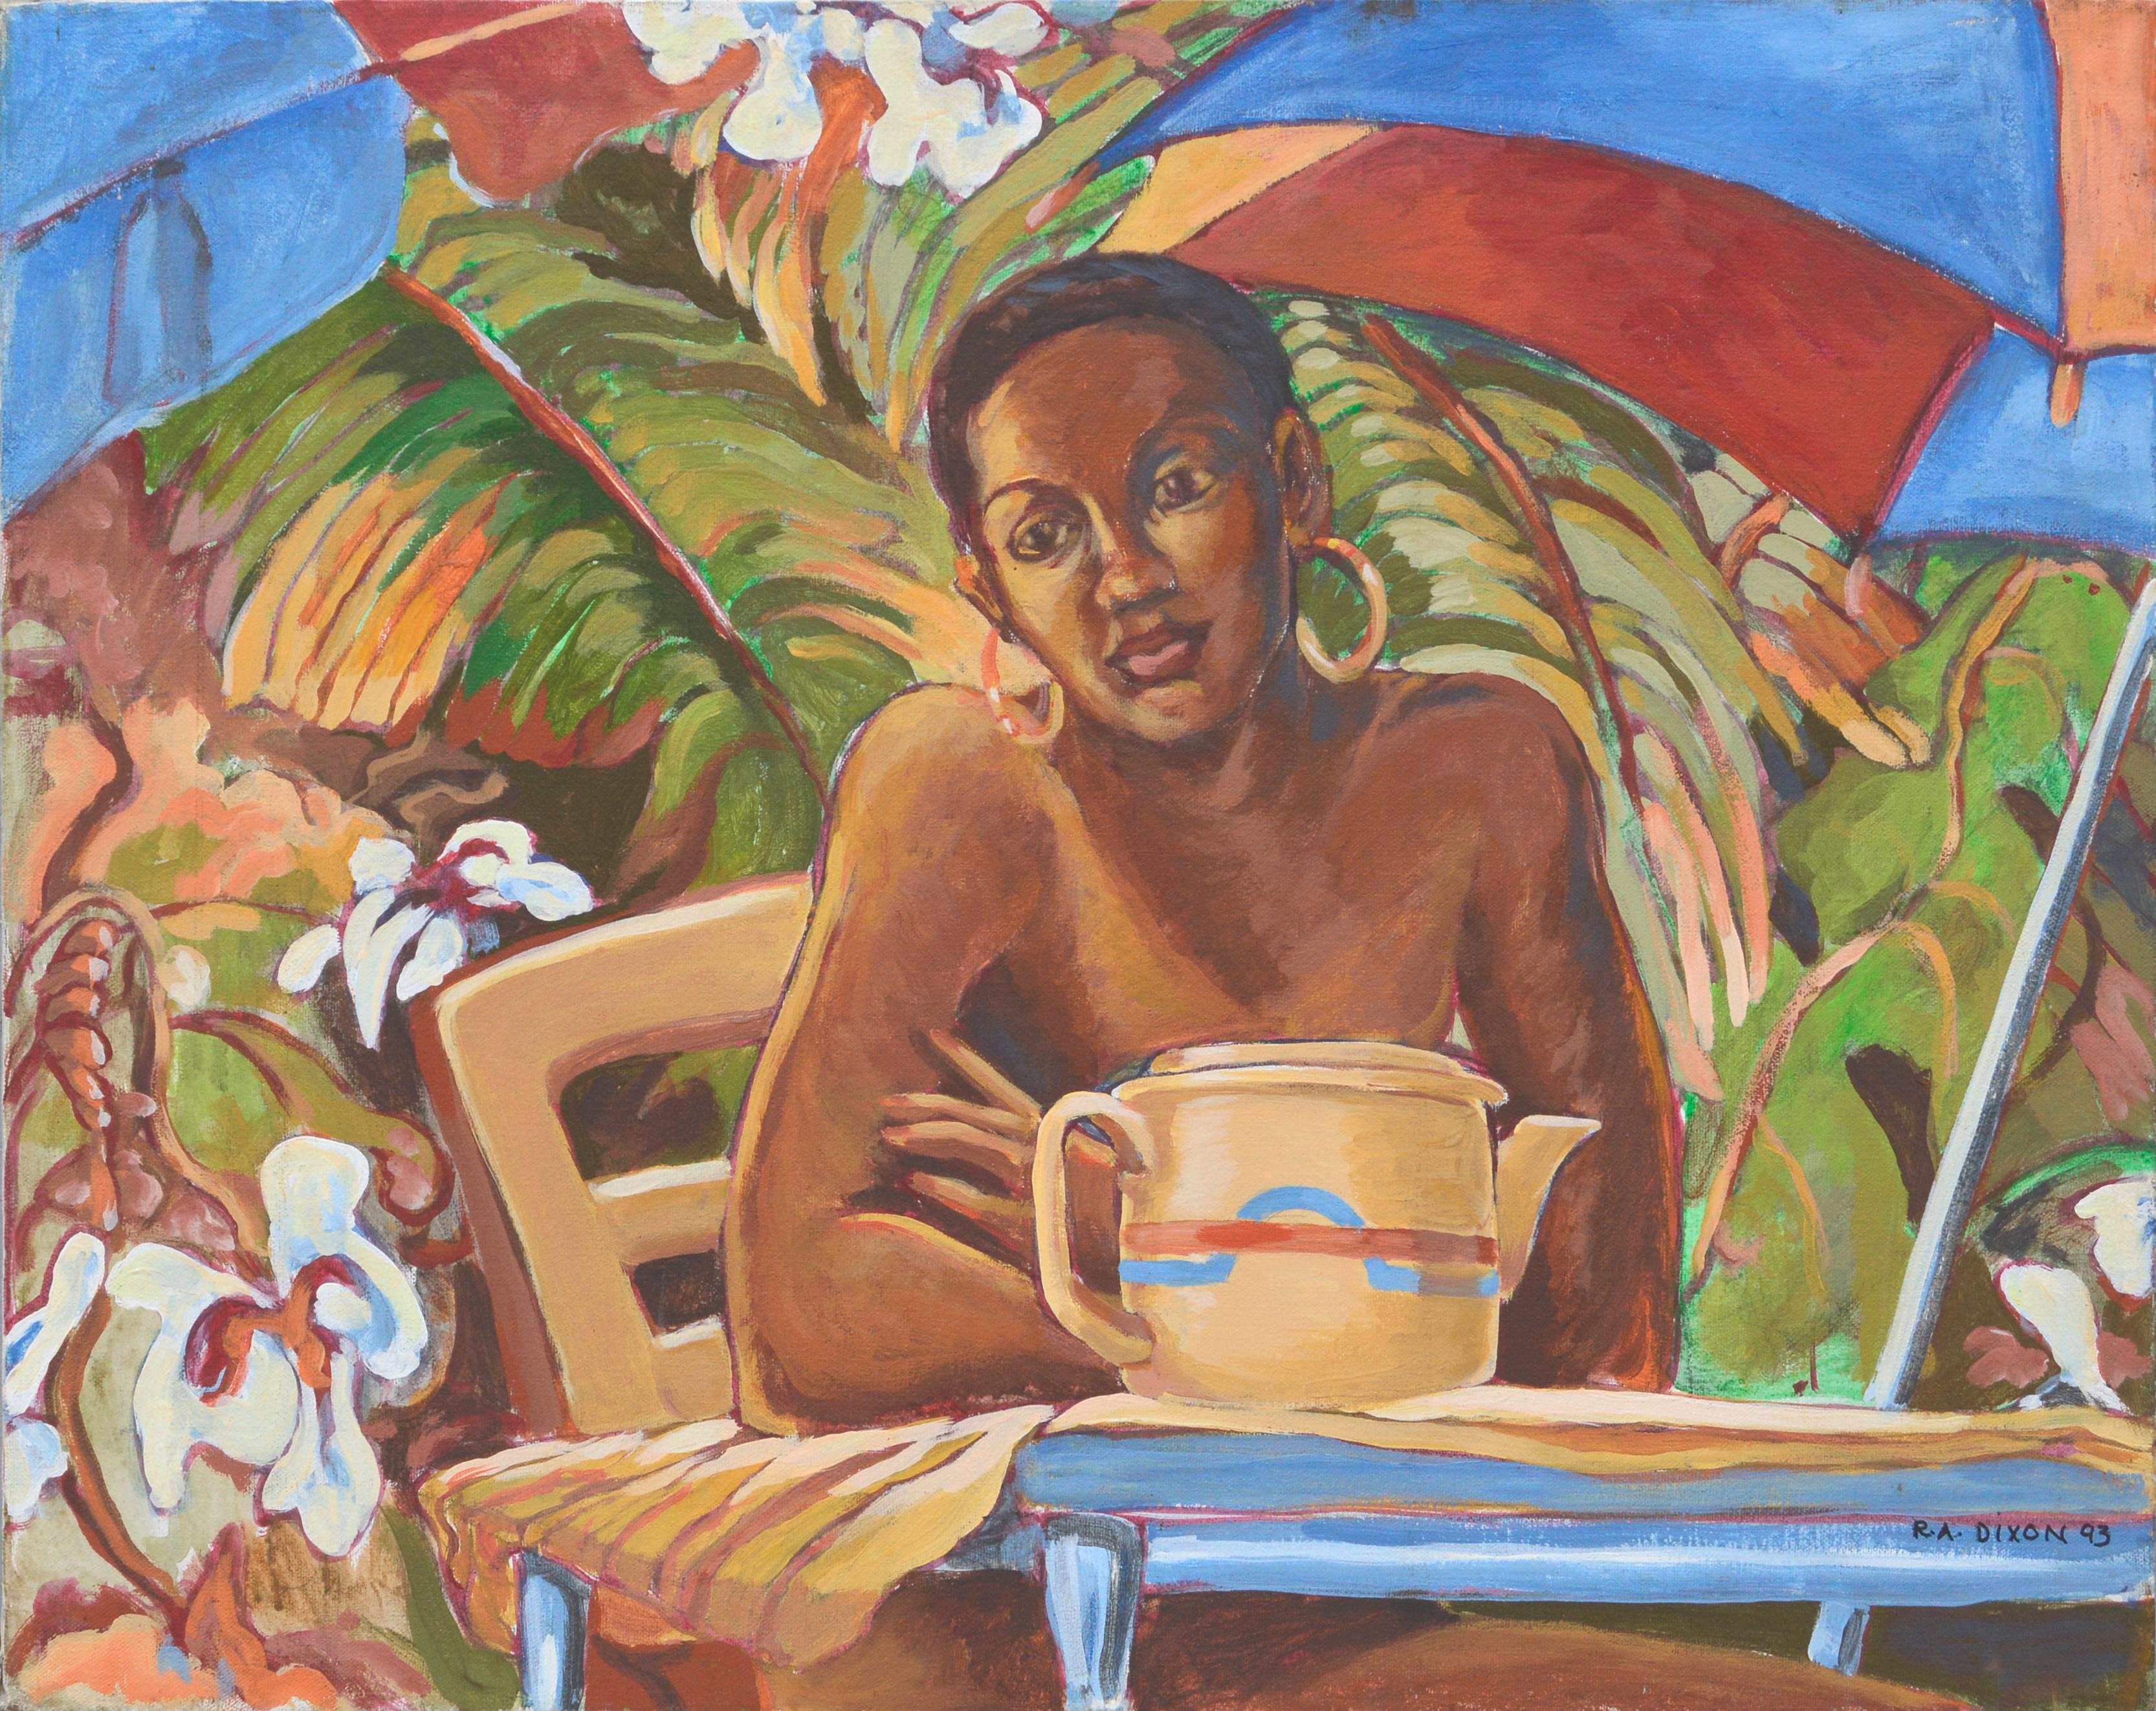 Portrait of a Woman with Teapot and Tropical Plants